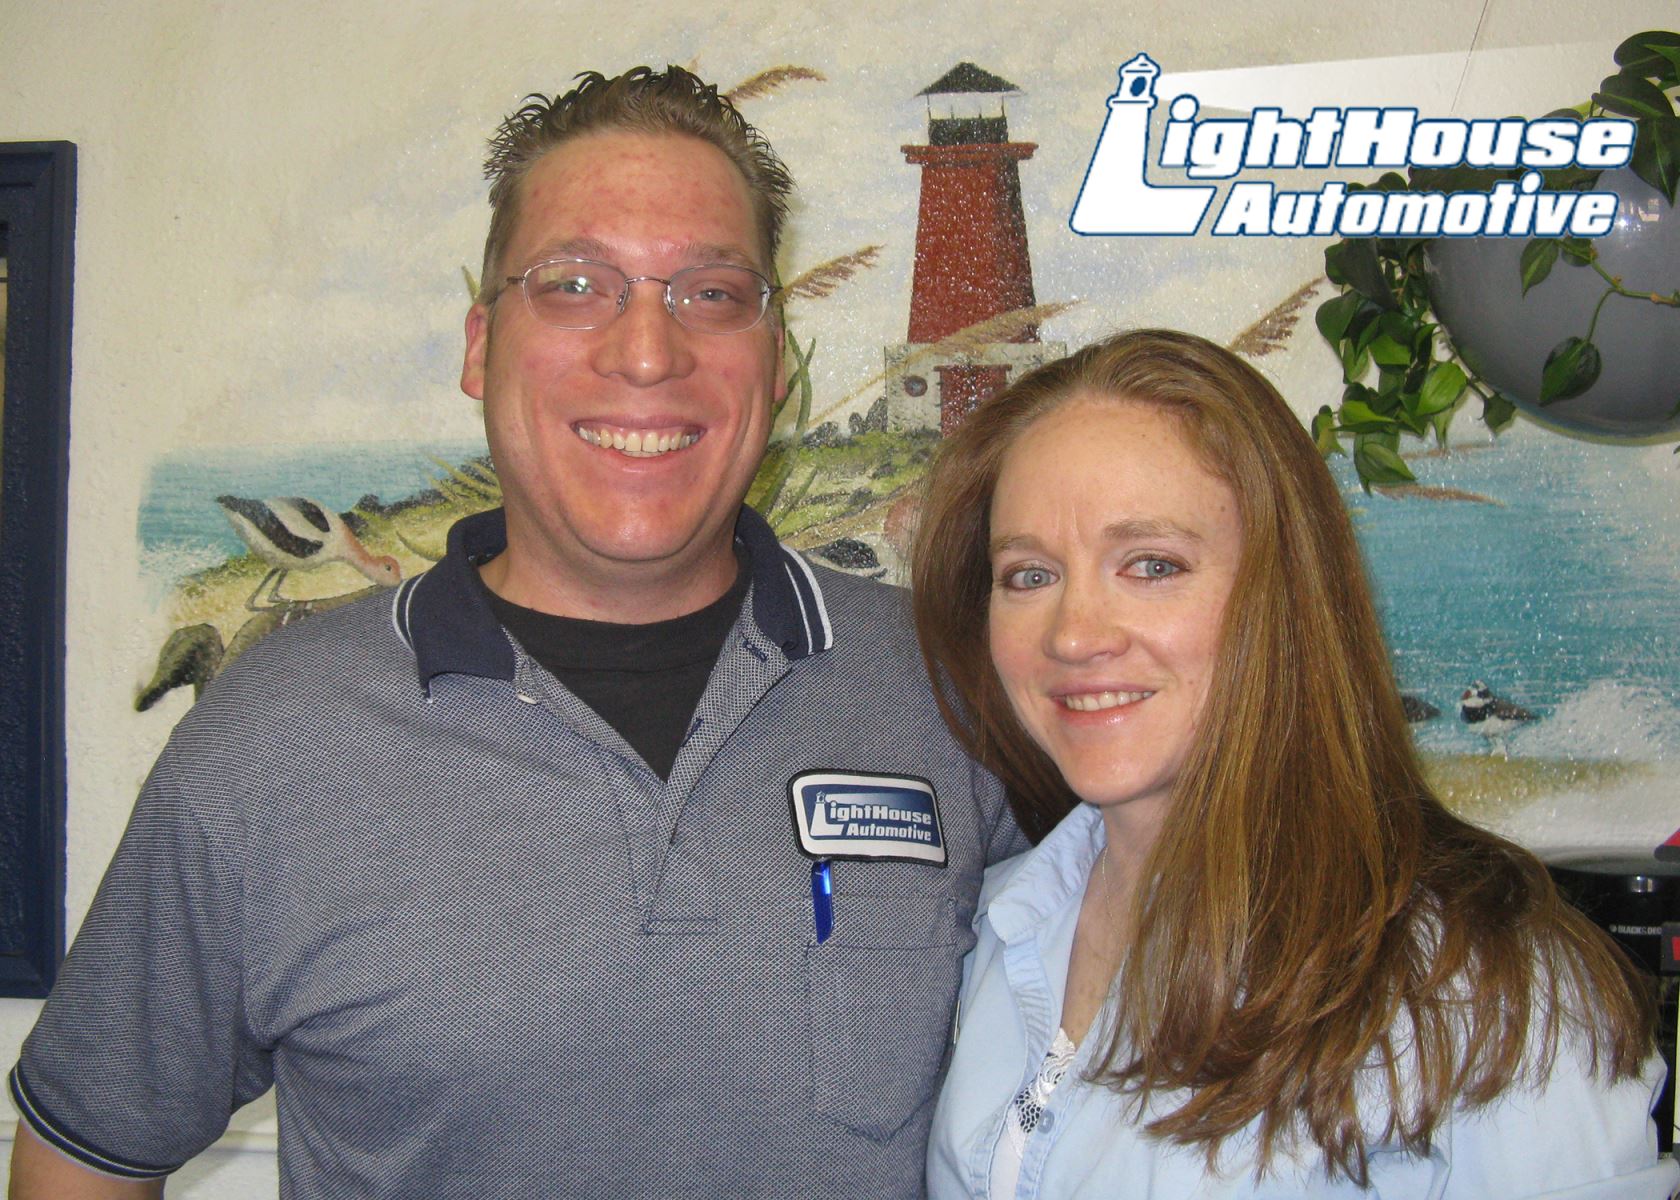 Customer Appreciates Family-Oriented Approach at LightHouse Automotive